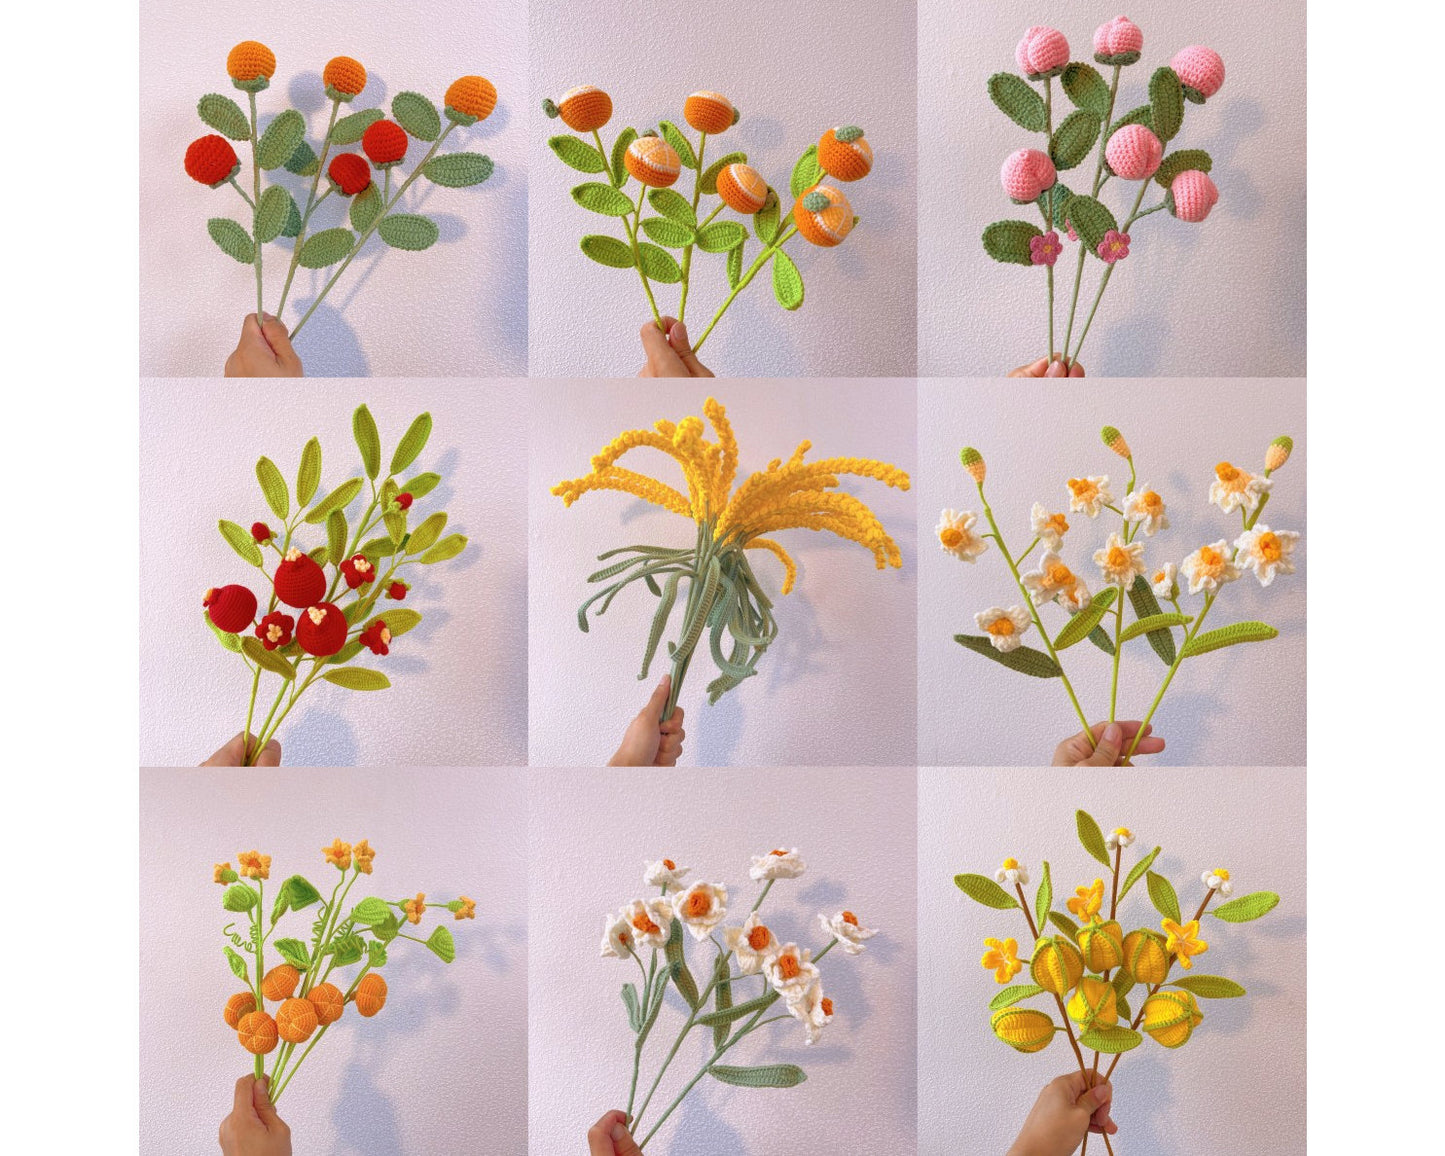 Autumn Bounty Collection - Handmade Crochet Stakes for Fall Decor, Bouquets, and Plant Markers, Bouquet Flower Accessories, Harvest Festival